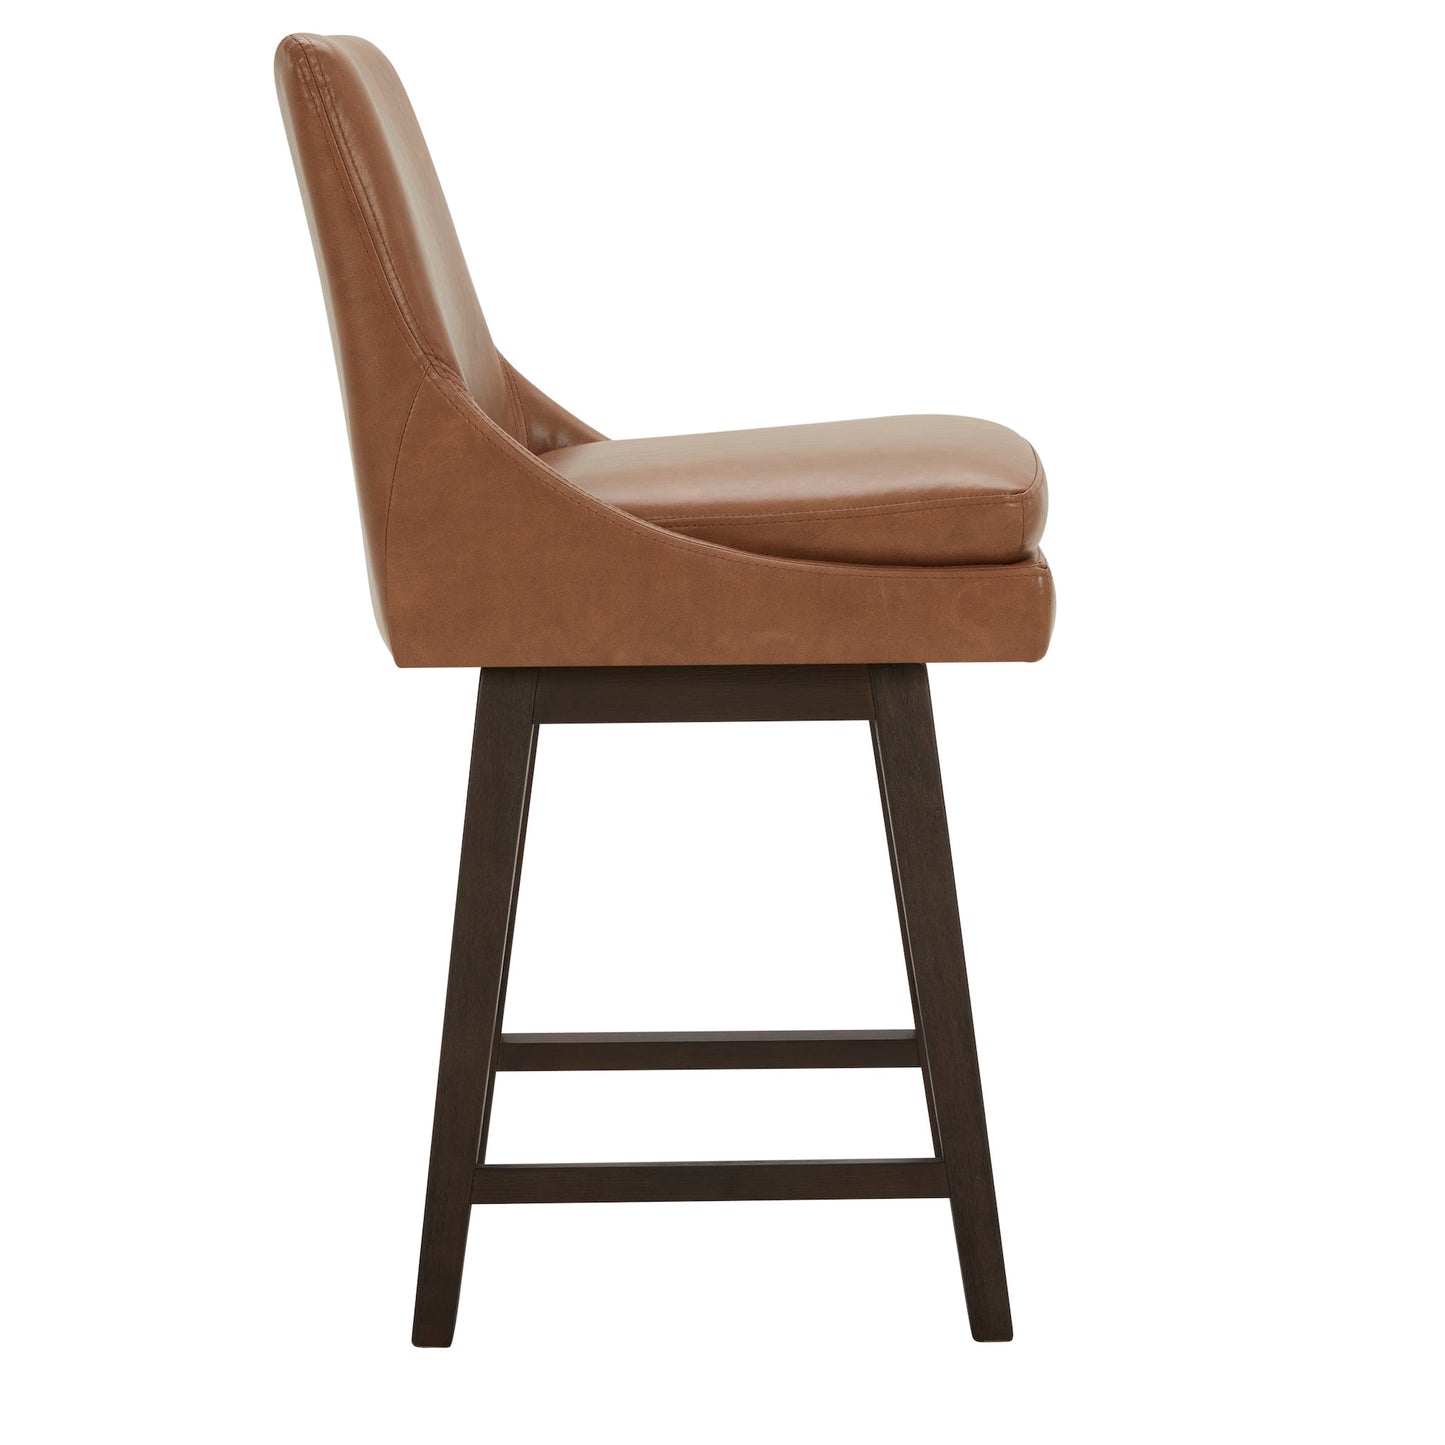 CHITA LIVING-Lissa Swivel Counter Stool 26.8''-Counter Stools-Faux Leather-Saddle Brown-